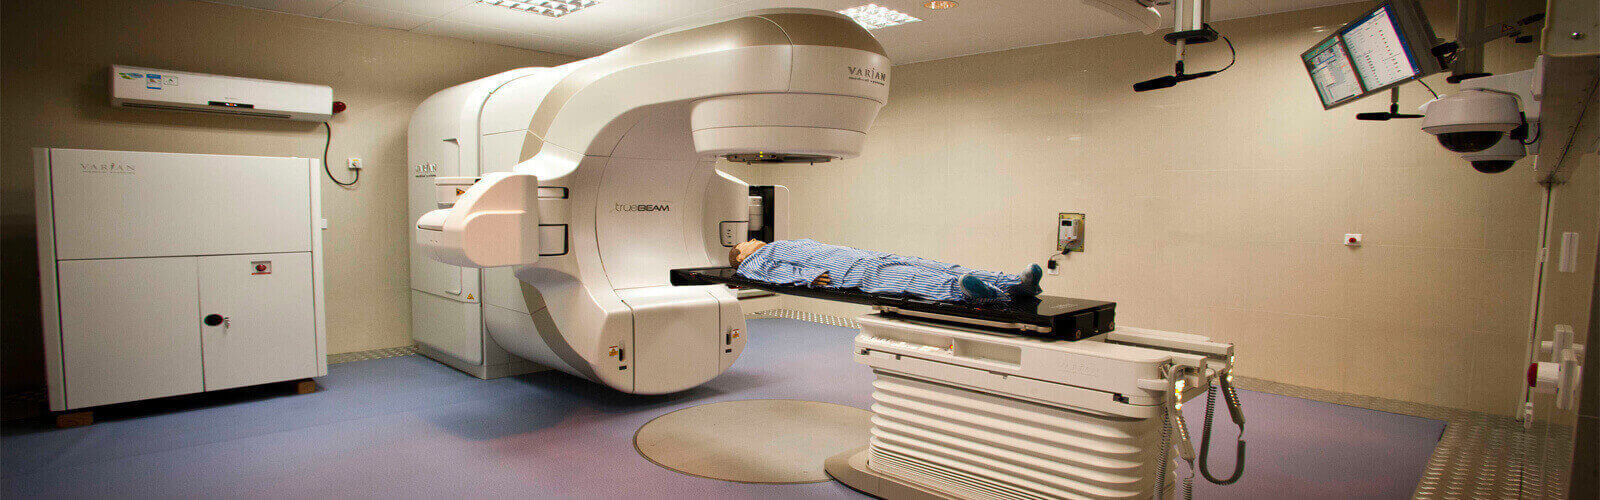 Radiotherapy in Gambia